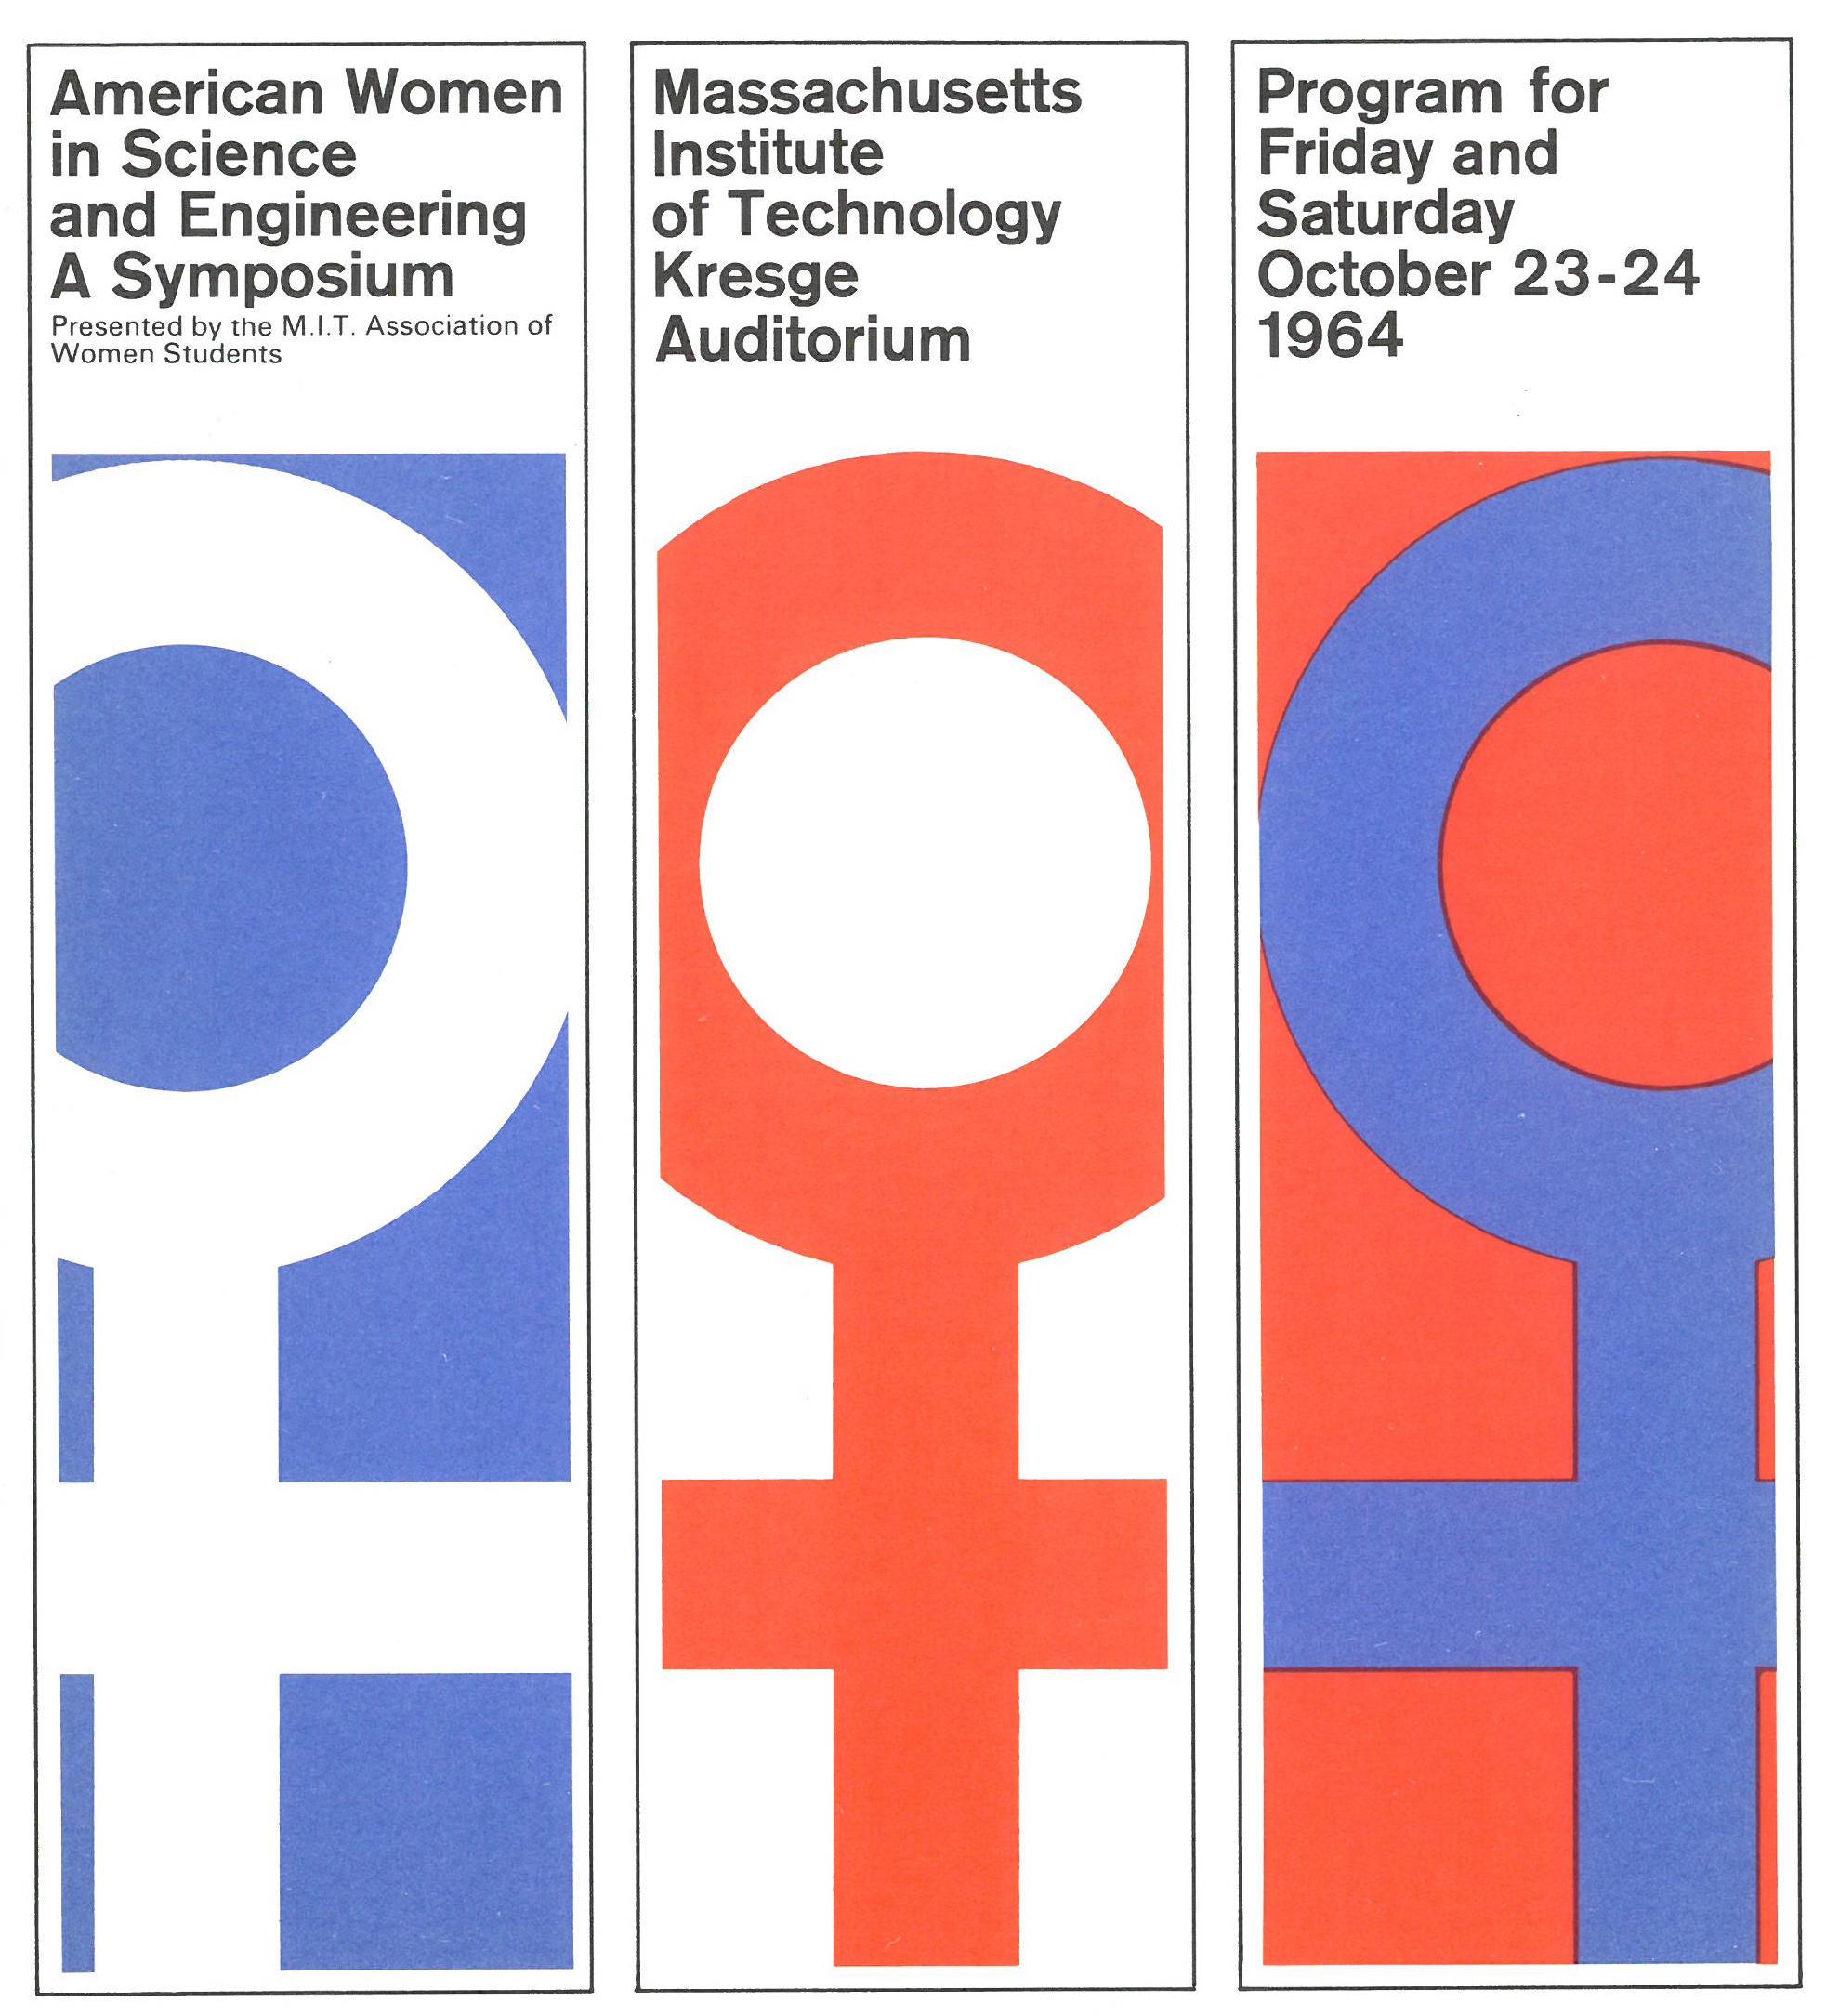 Document: "American Women in Science and Engineering" symposium brochure, 1964